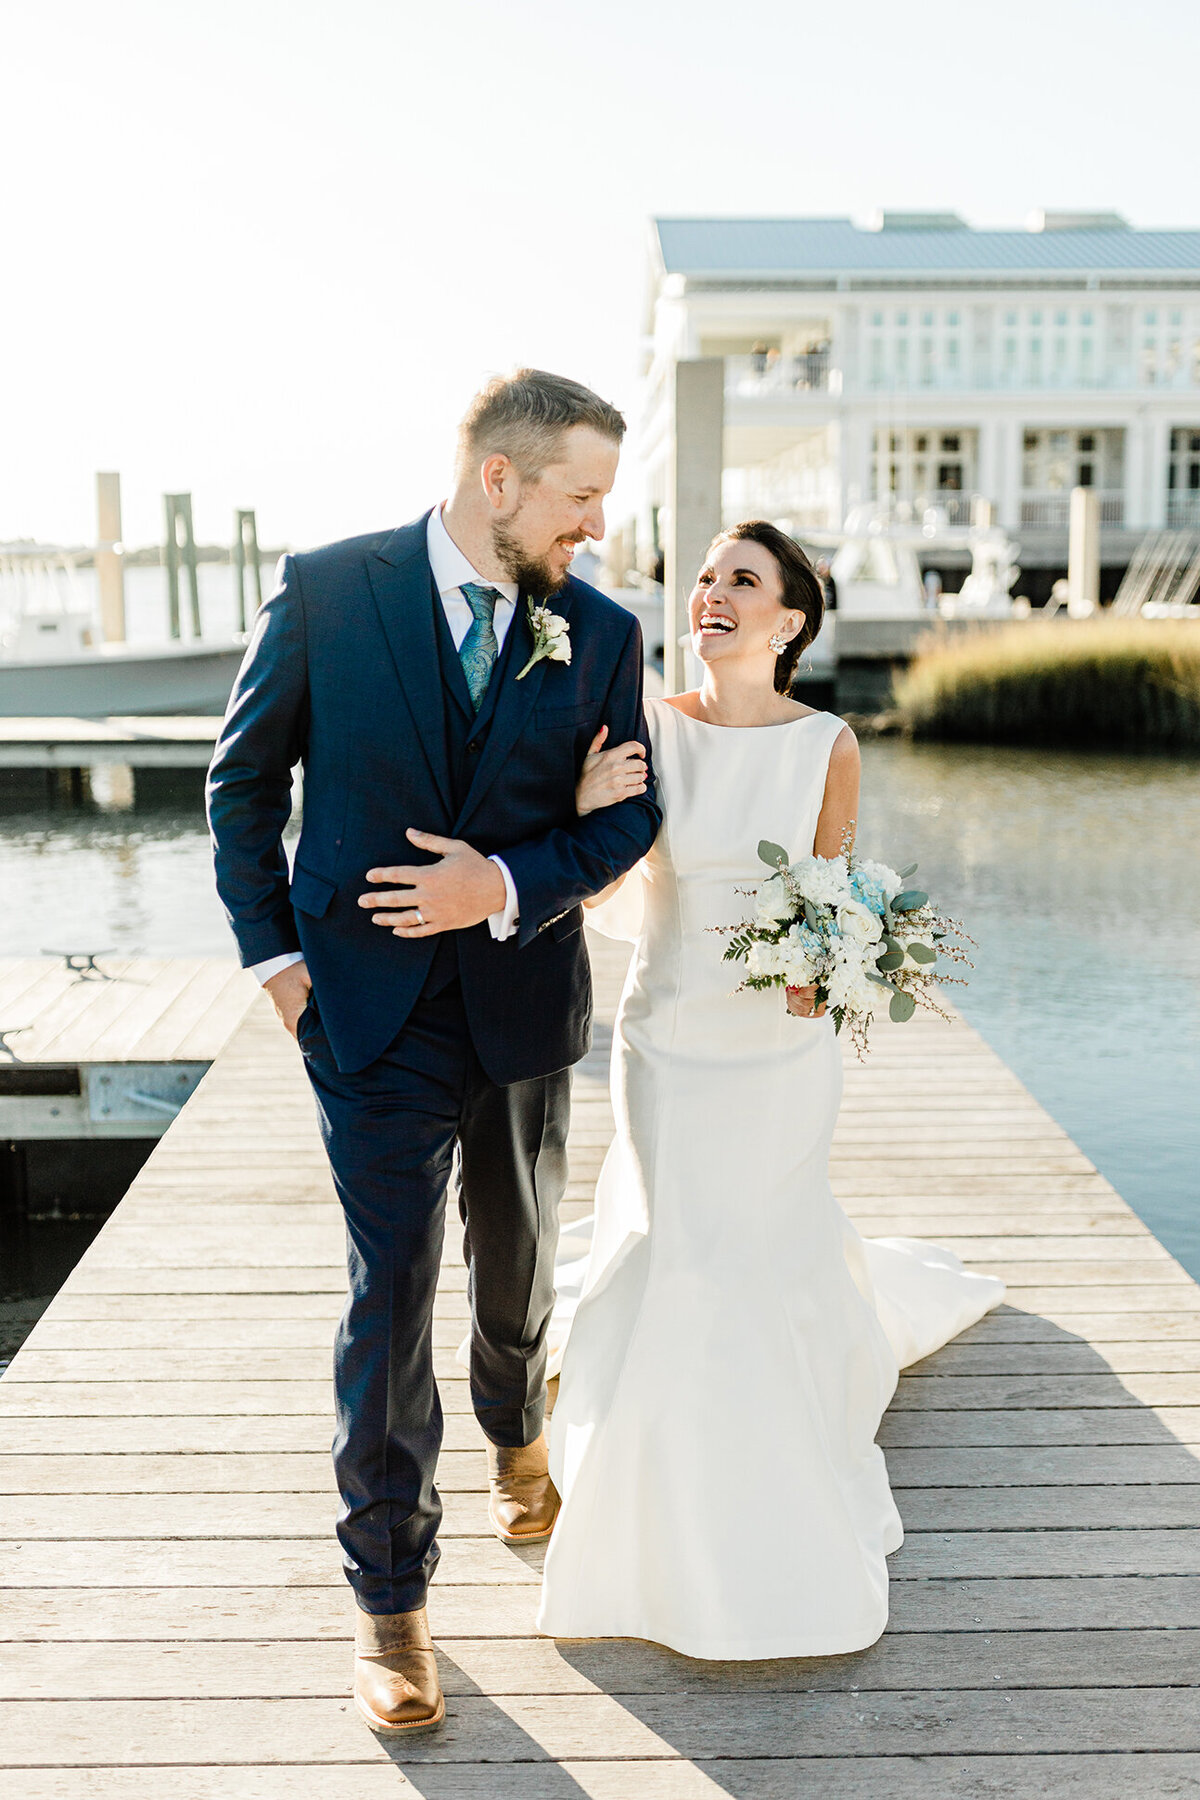 Dockside wedding photos never looked so good! walking down the dock these two took our breath away.